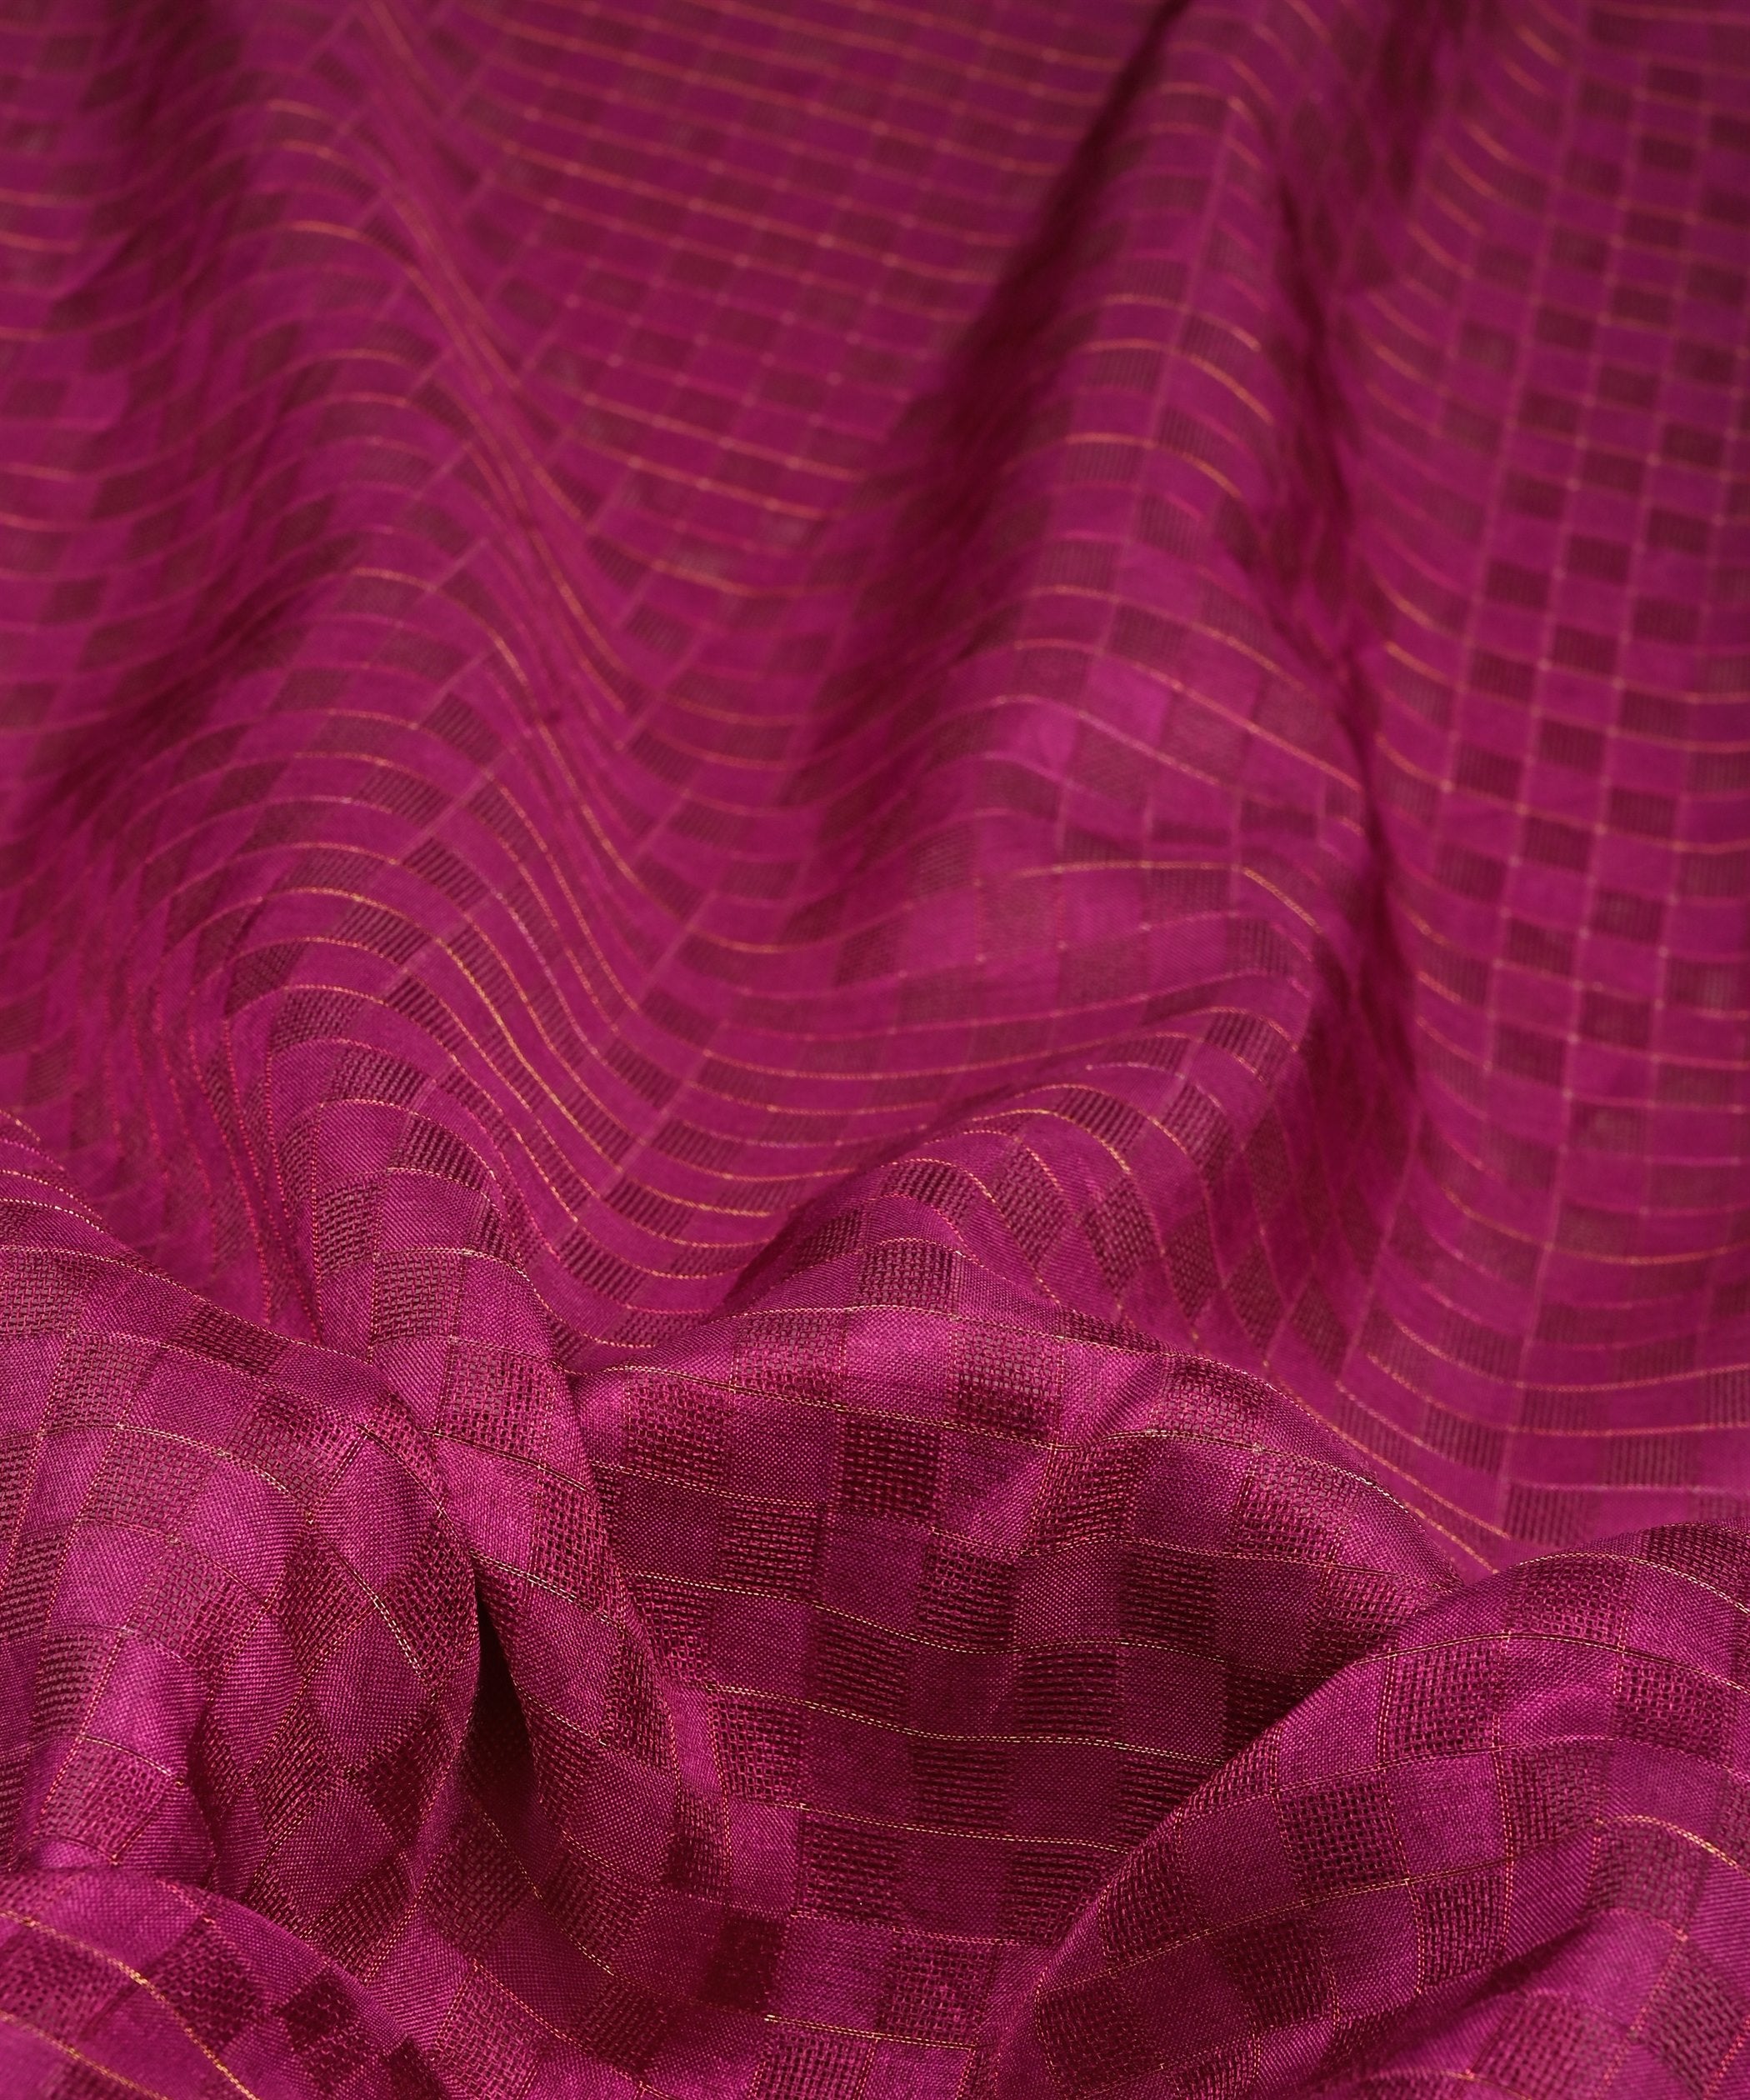 Violet Jute fabric with Checks